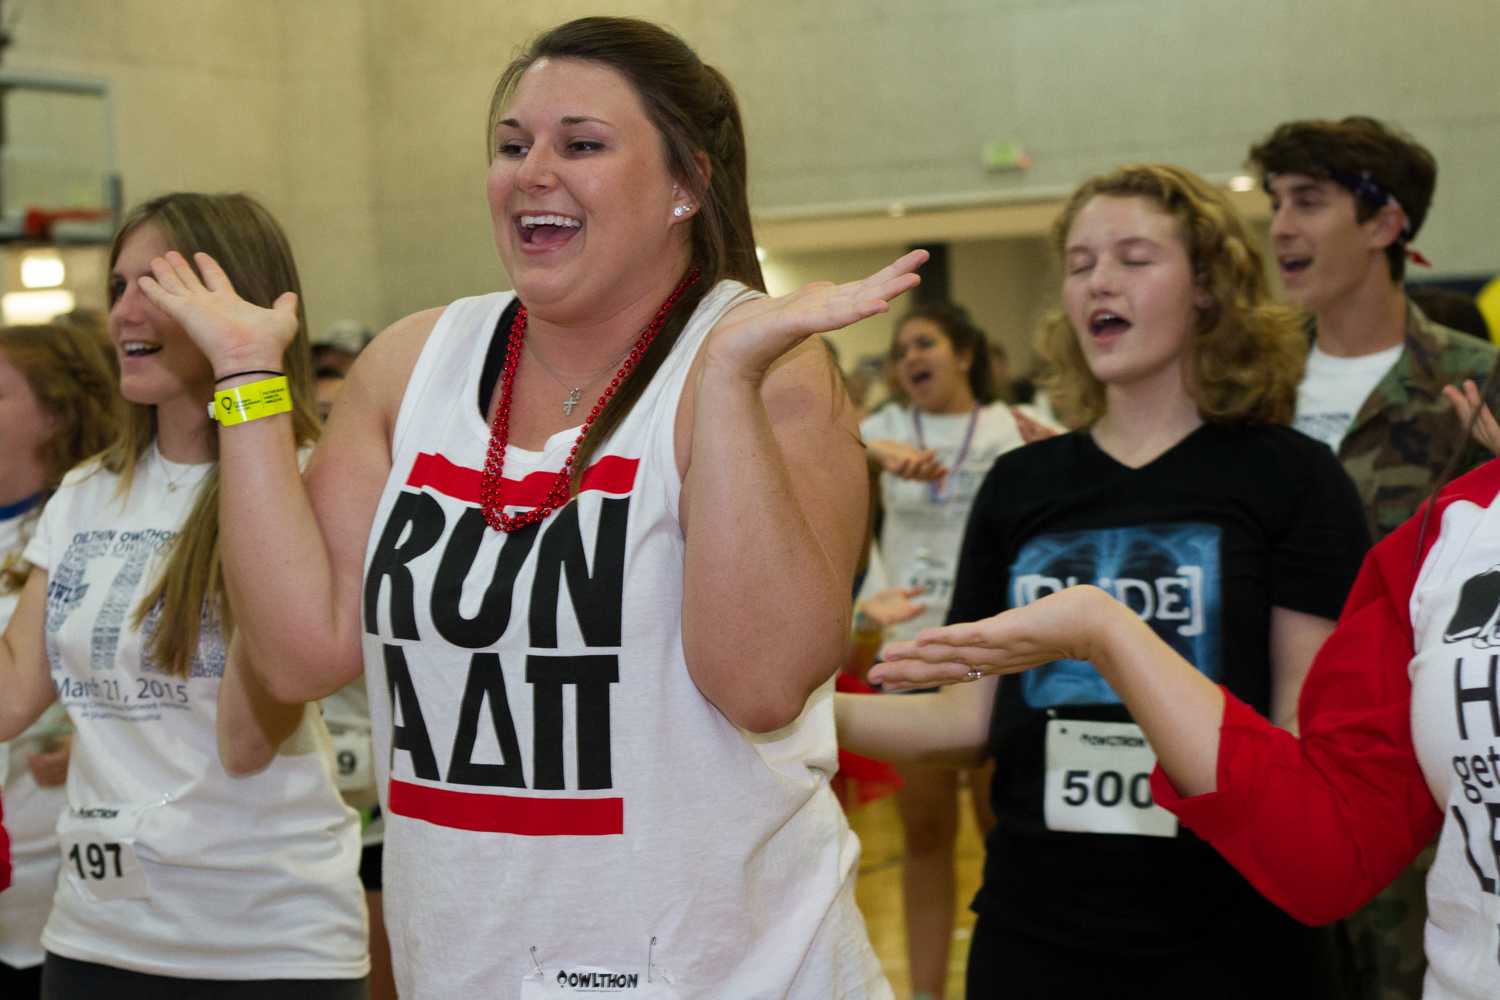 FAU students take part in OWLthon, a dance marathon that raises money for Childrens Miracle Network Hospitals. This year OWlthon raised $66,137.15, a huge increase compared to last years fundraising of $5,732.10.